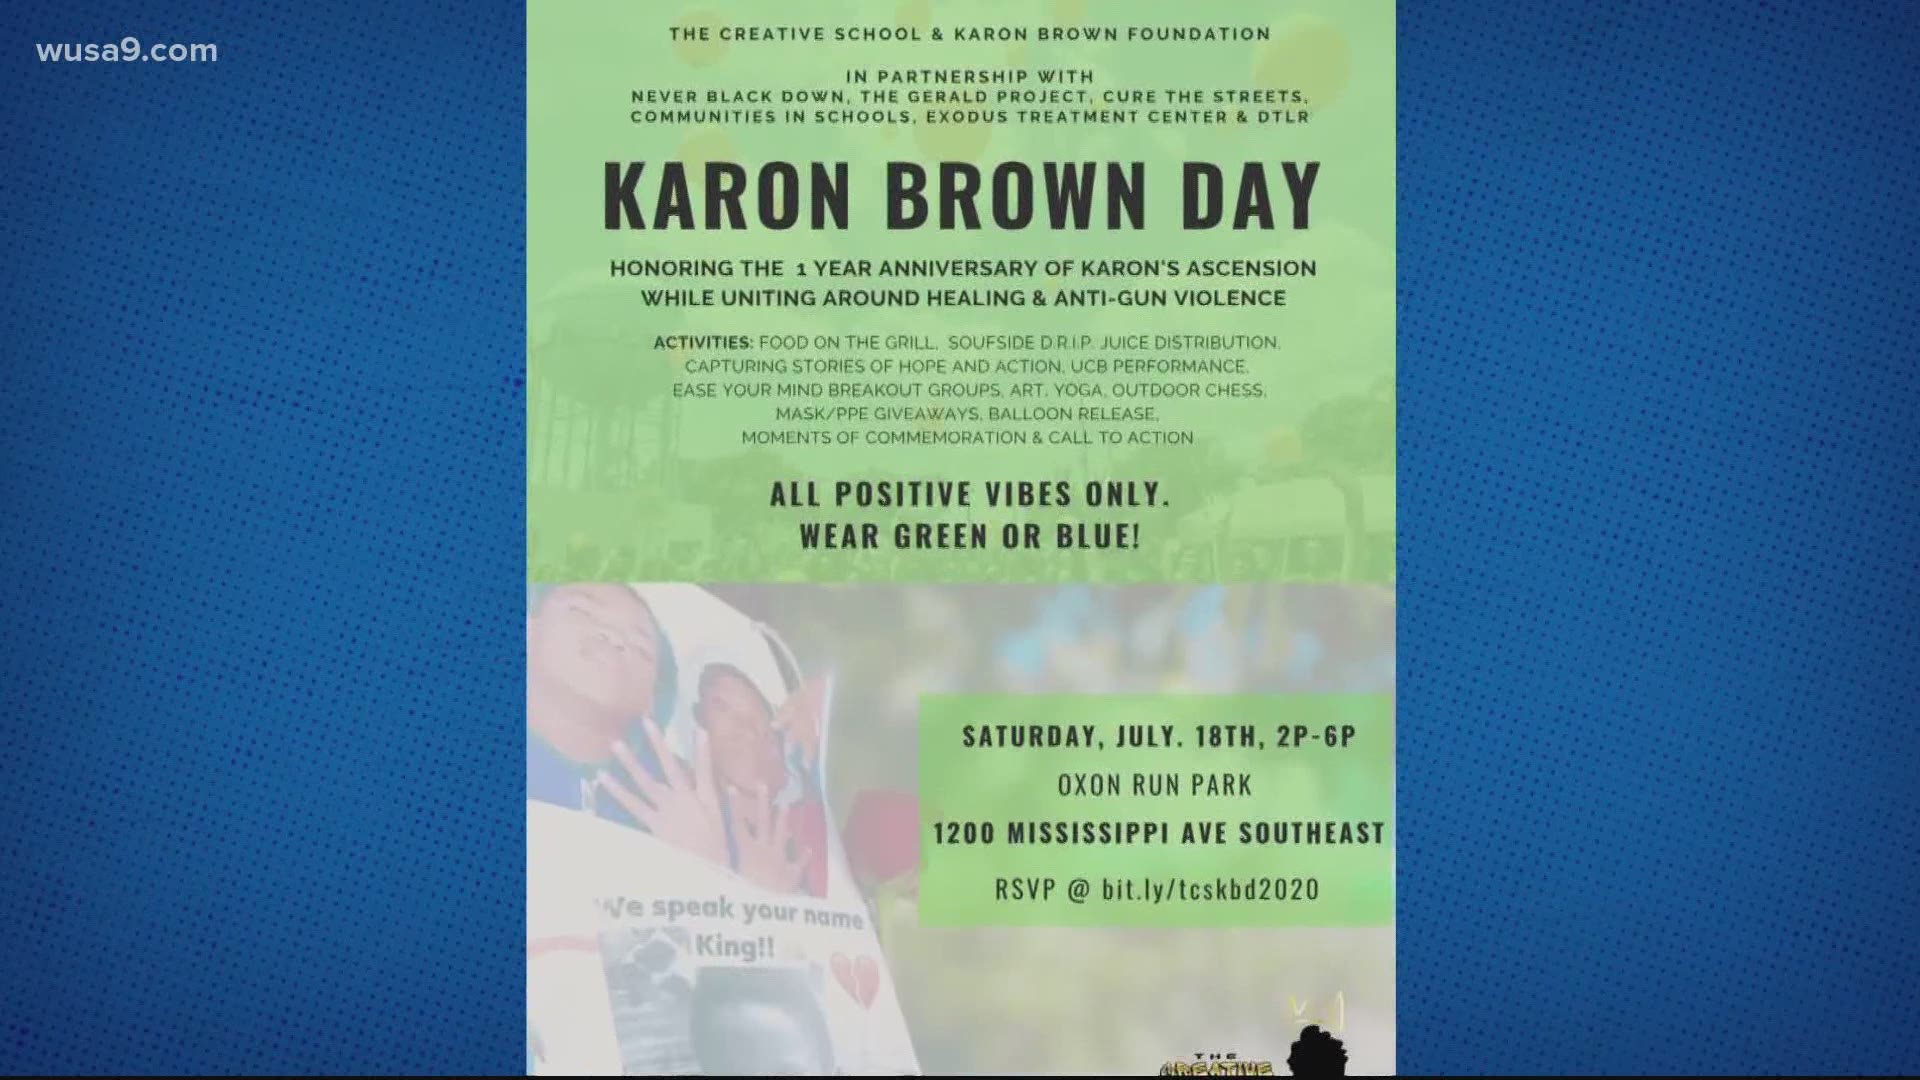 Karon Brown Day was planned months ago, now organizers are hoping to call attention to Davon McNeal’s death and other young children who have been killed in D.C.